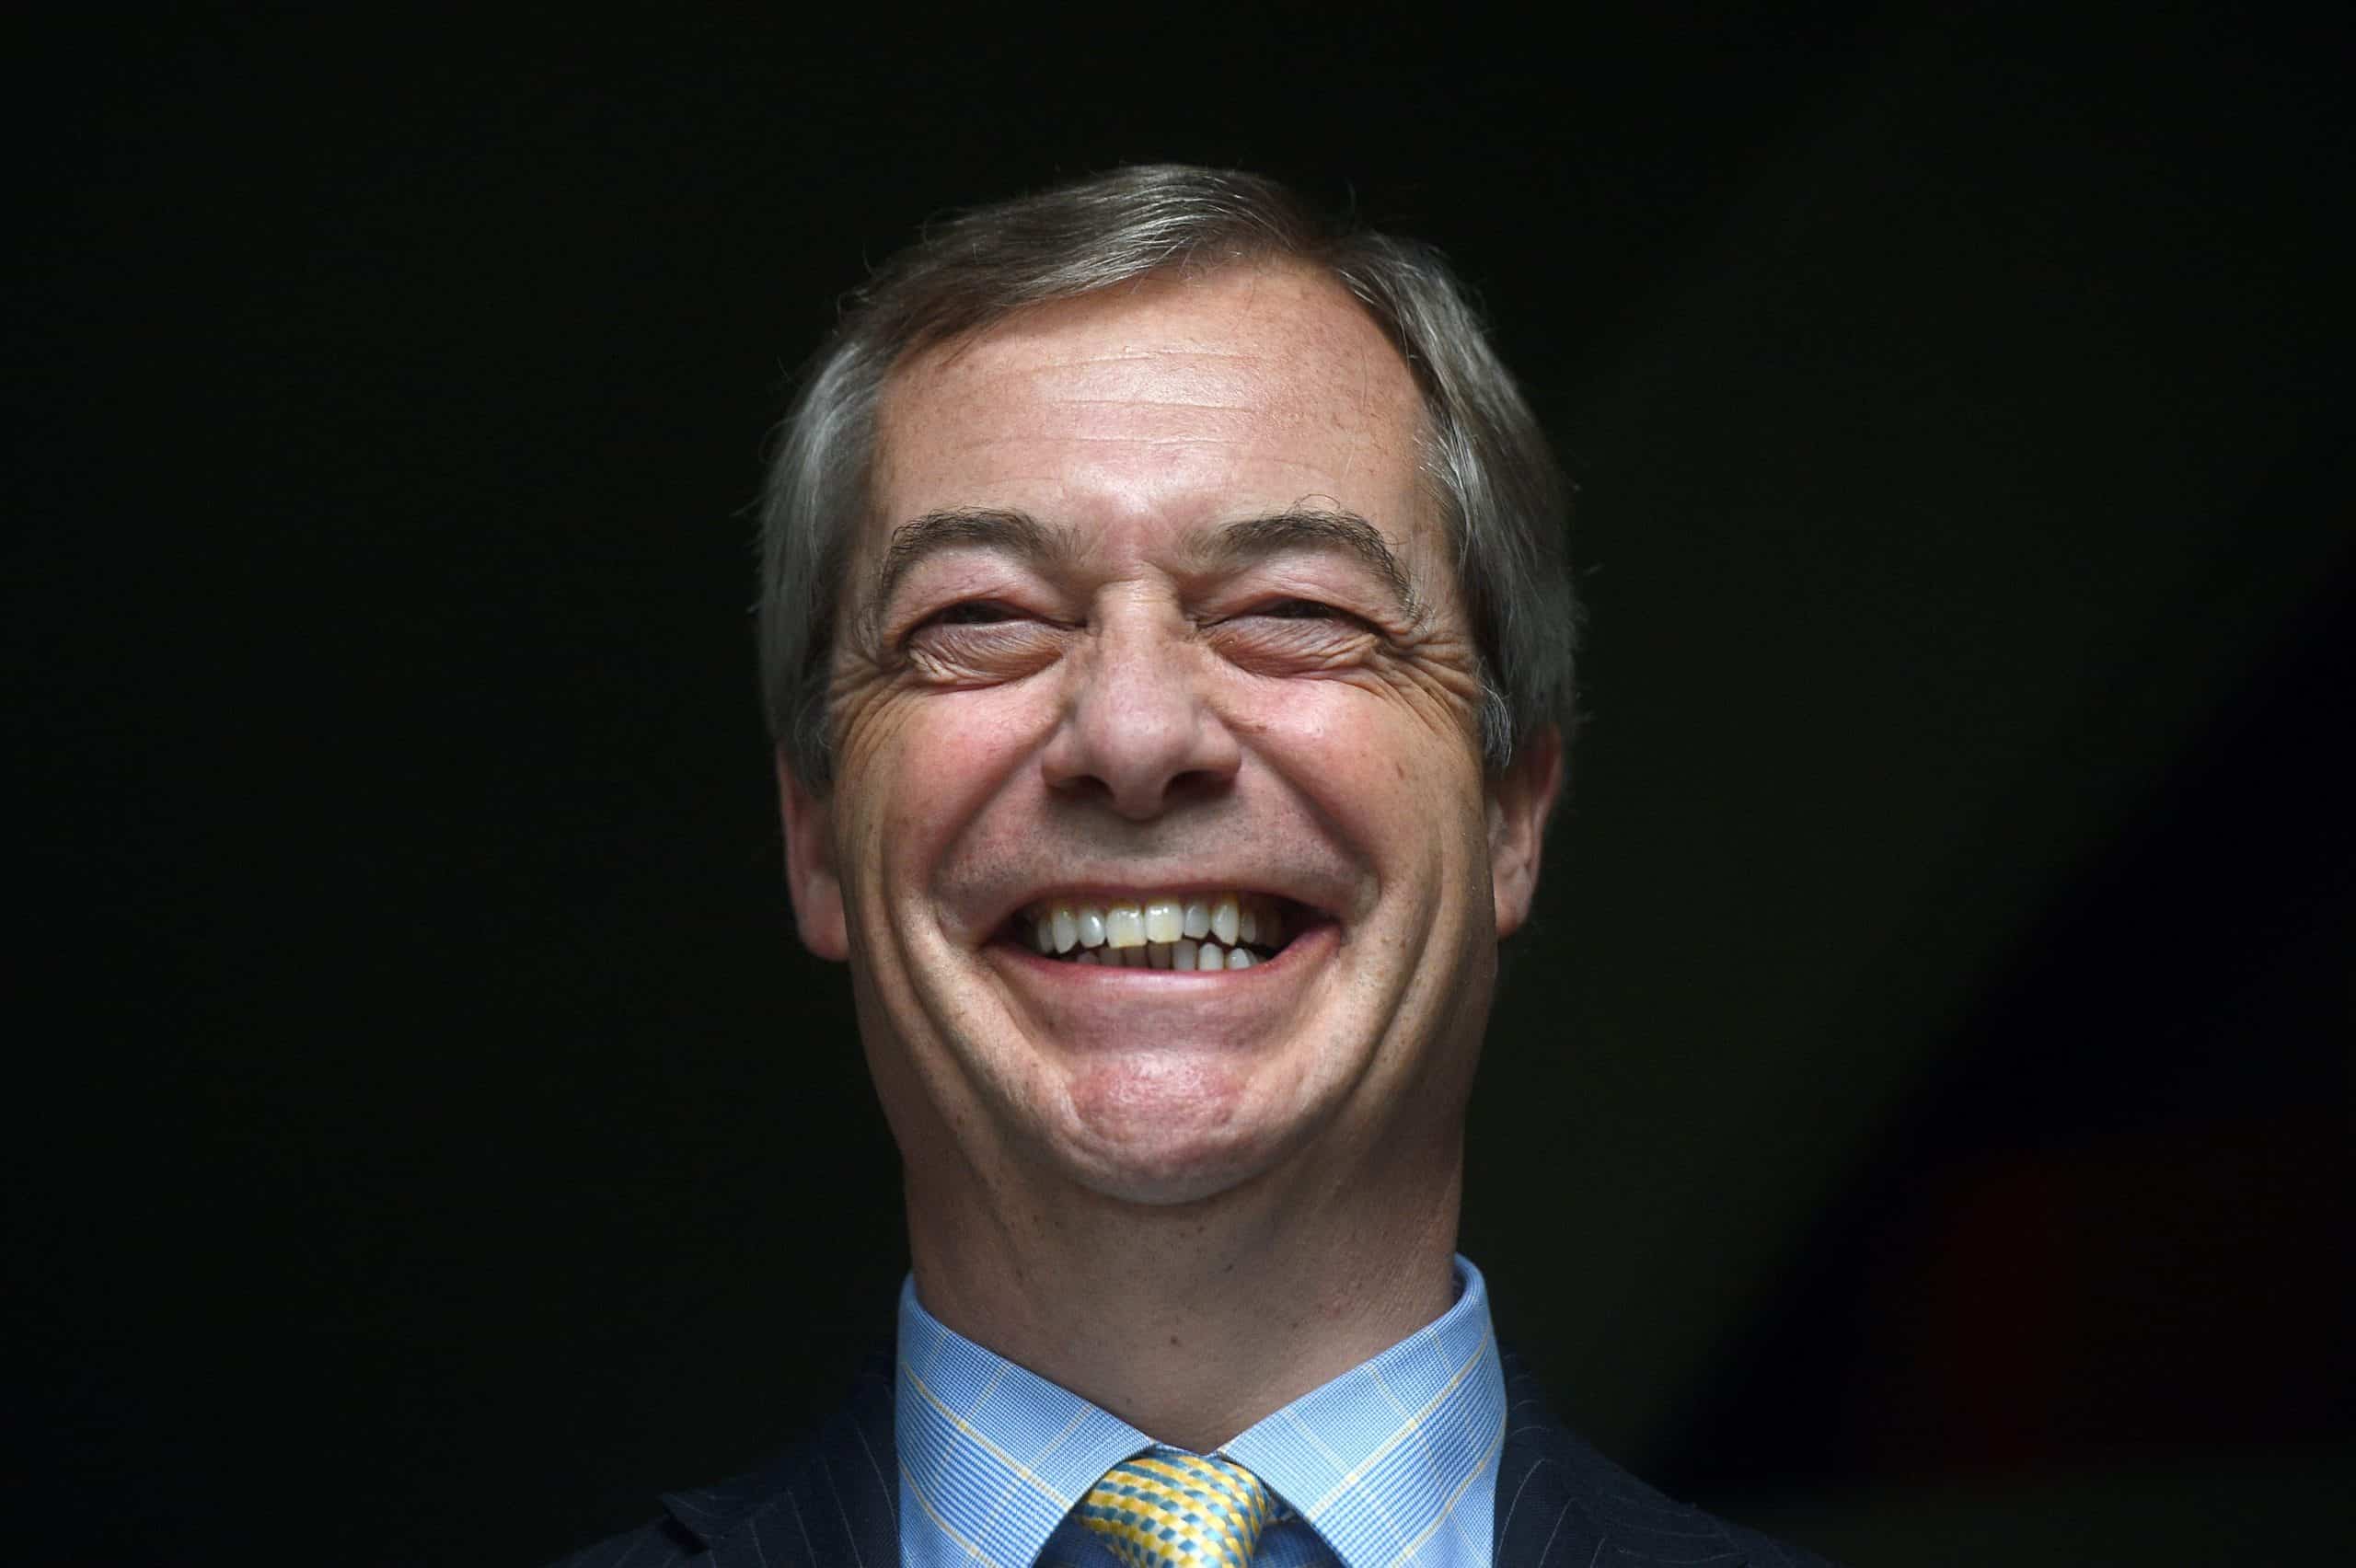 Want to understand Nigel Farage? Watch this video